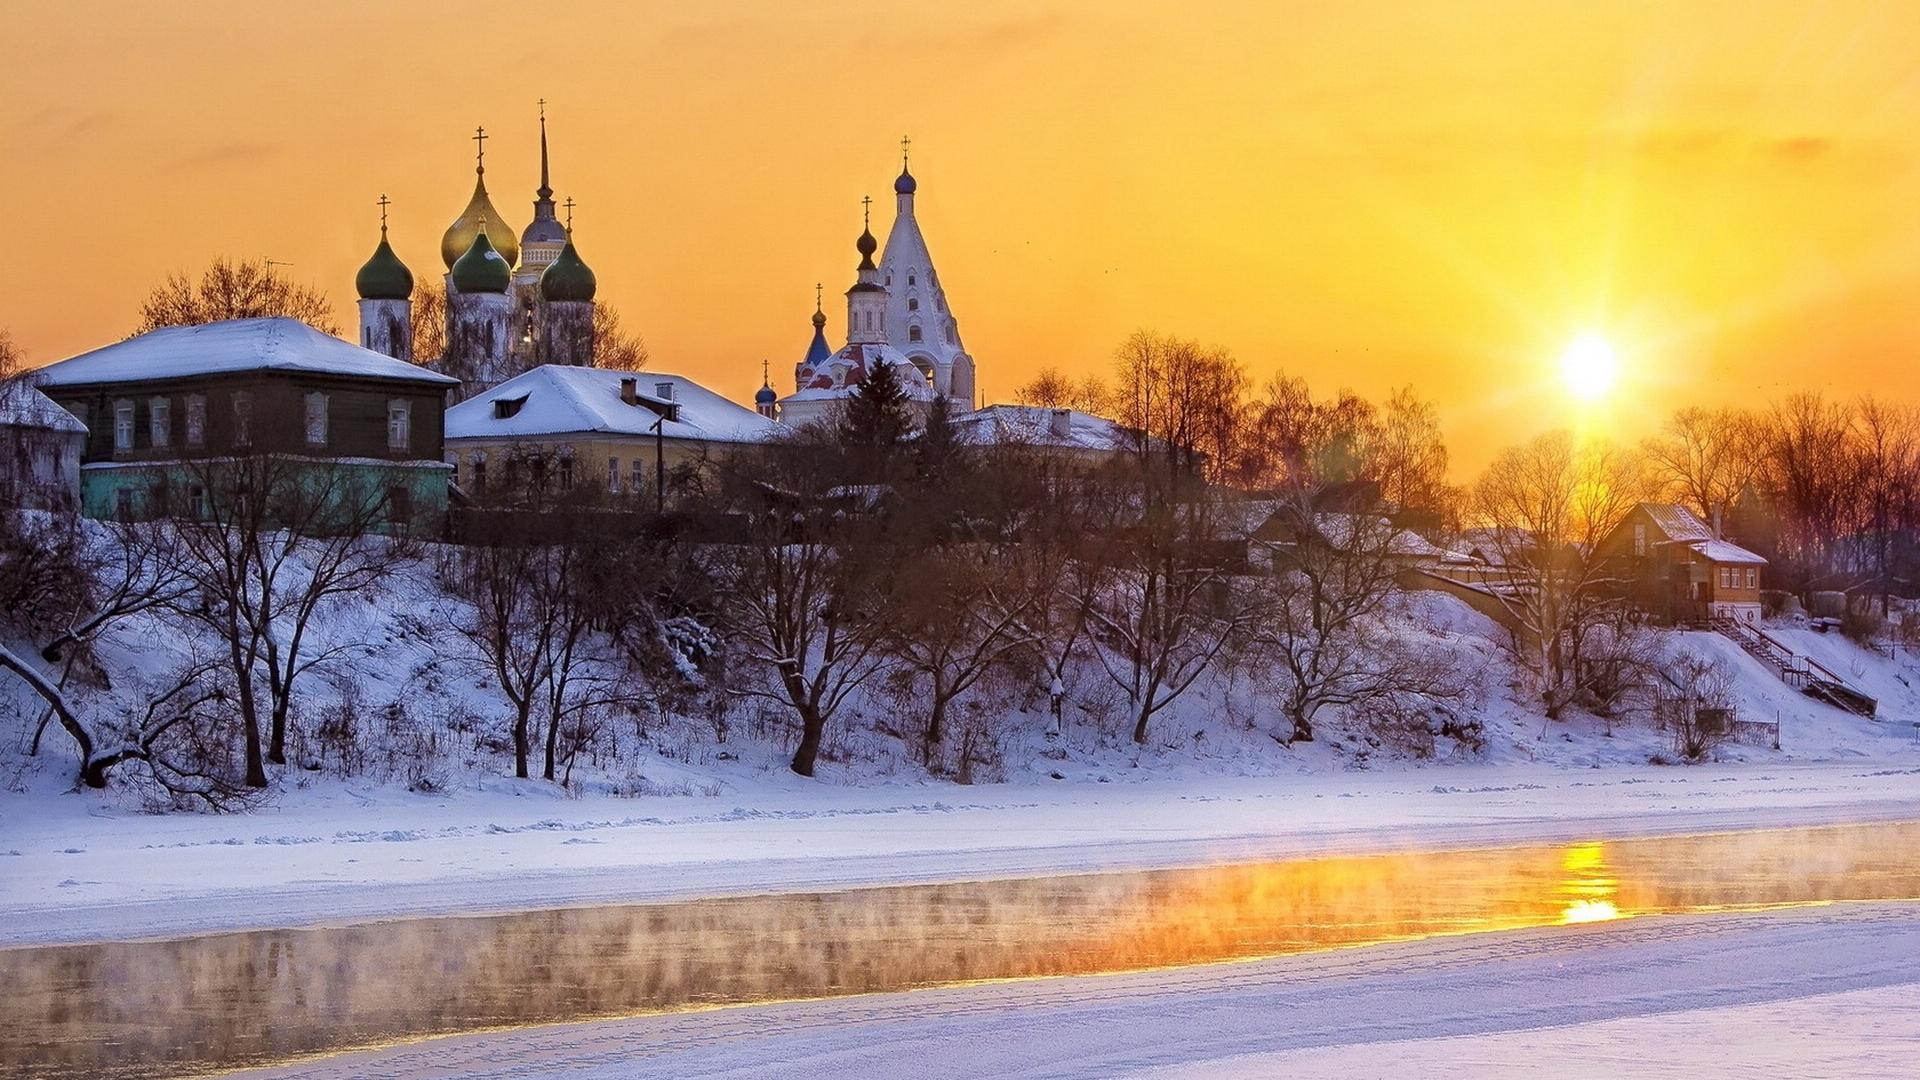 House winter russia snow 1080P 2K 4K 5K HD wallpapers free download   Wallpaper Flare